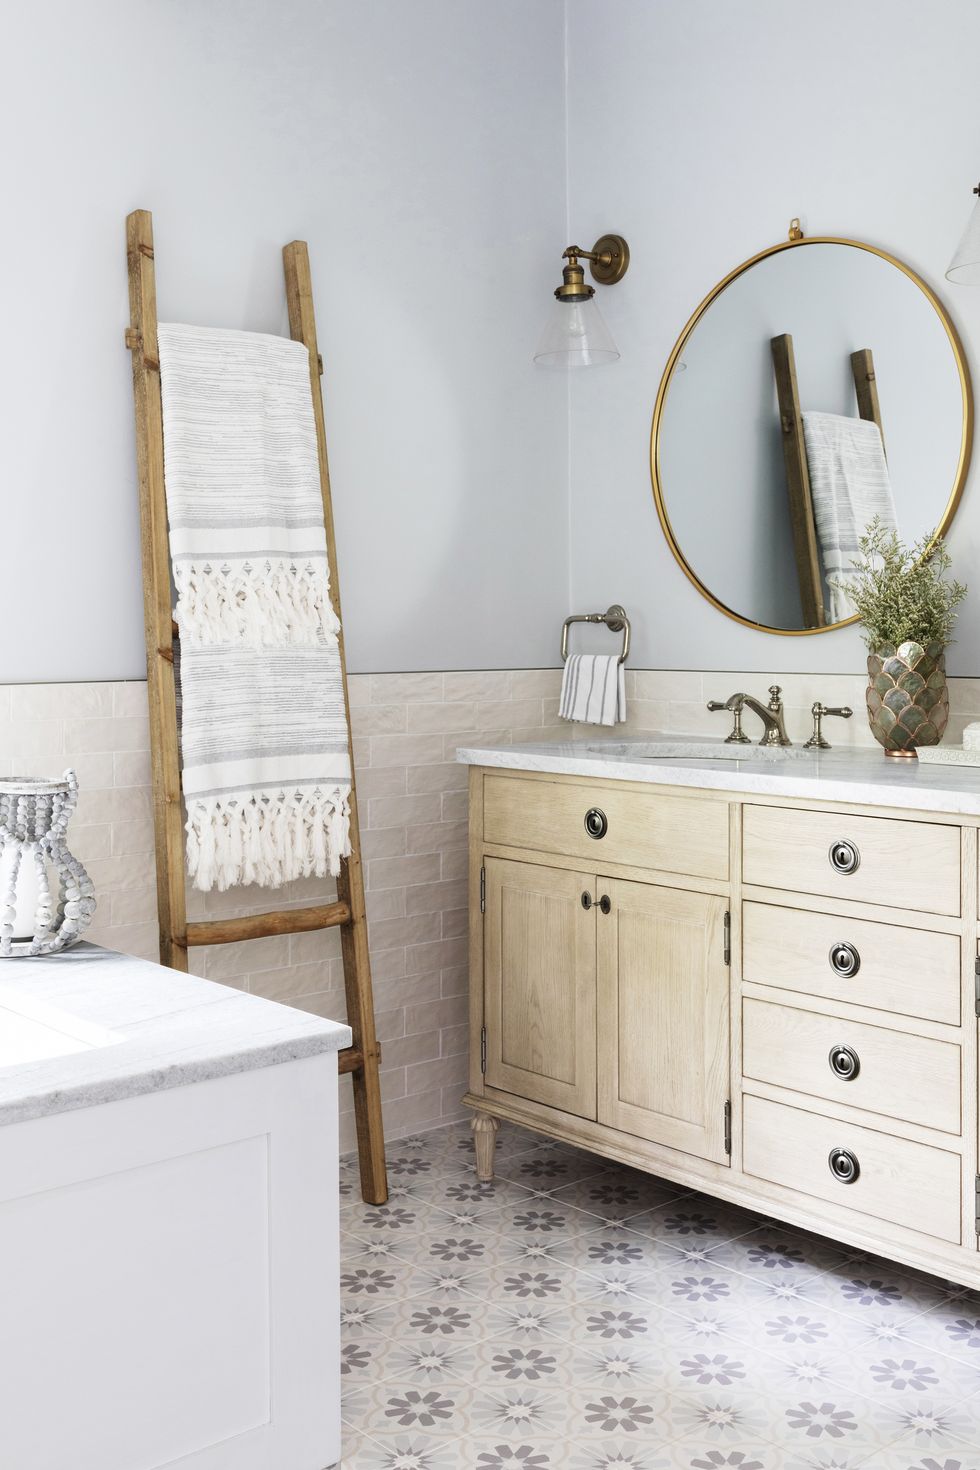 home featuring warm neutrals and soothing blue hues to accent the beautiful architecture of the vintage home interior designer karen b wolf bathroom with ladder as towel rod